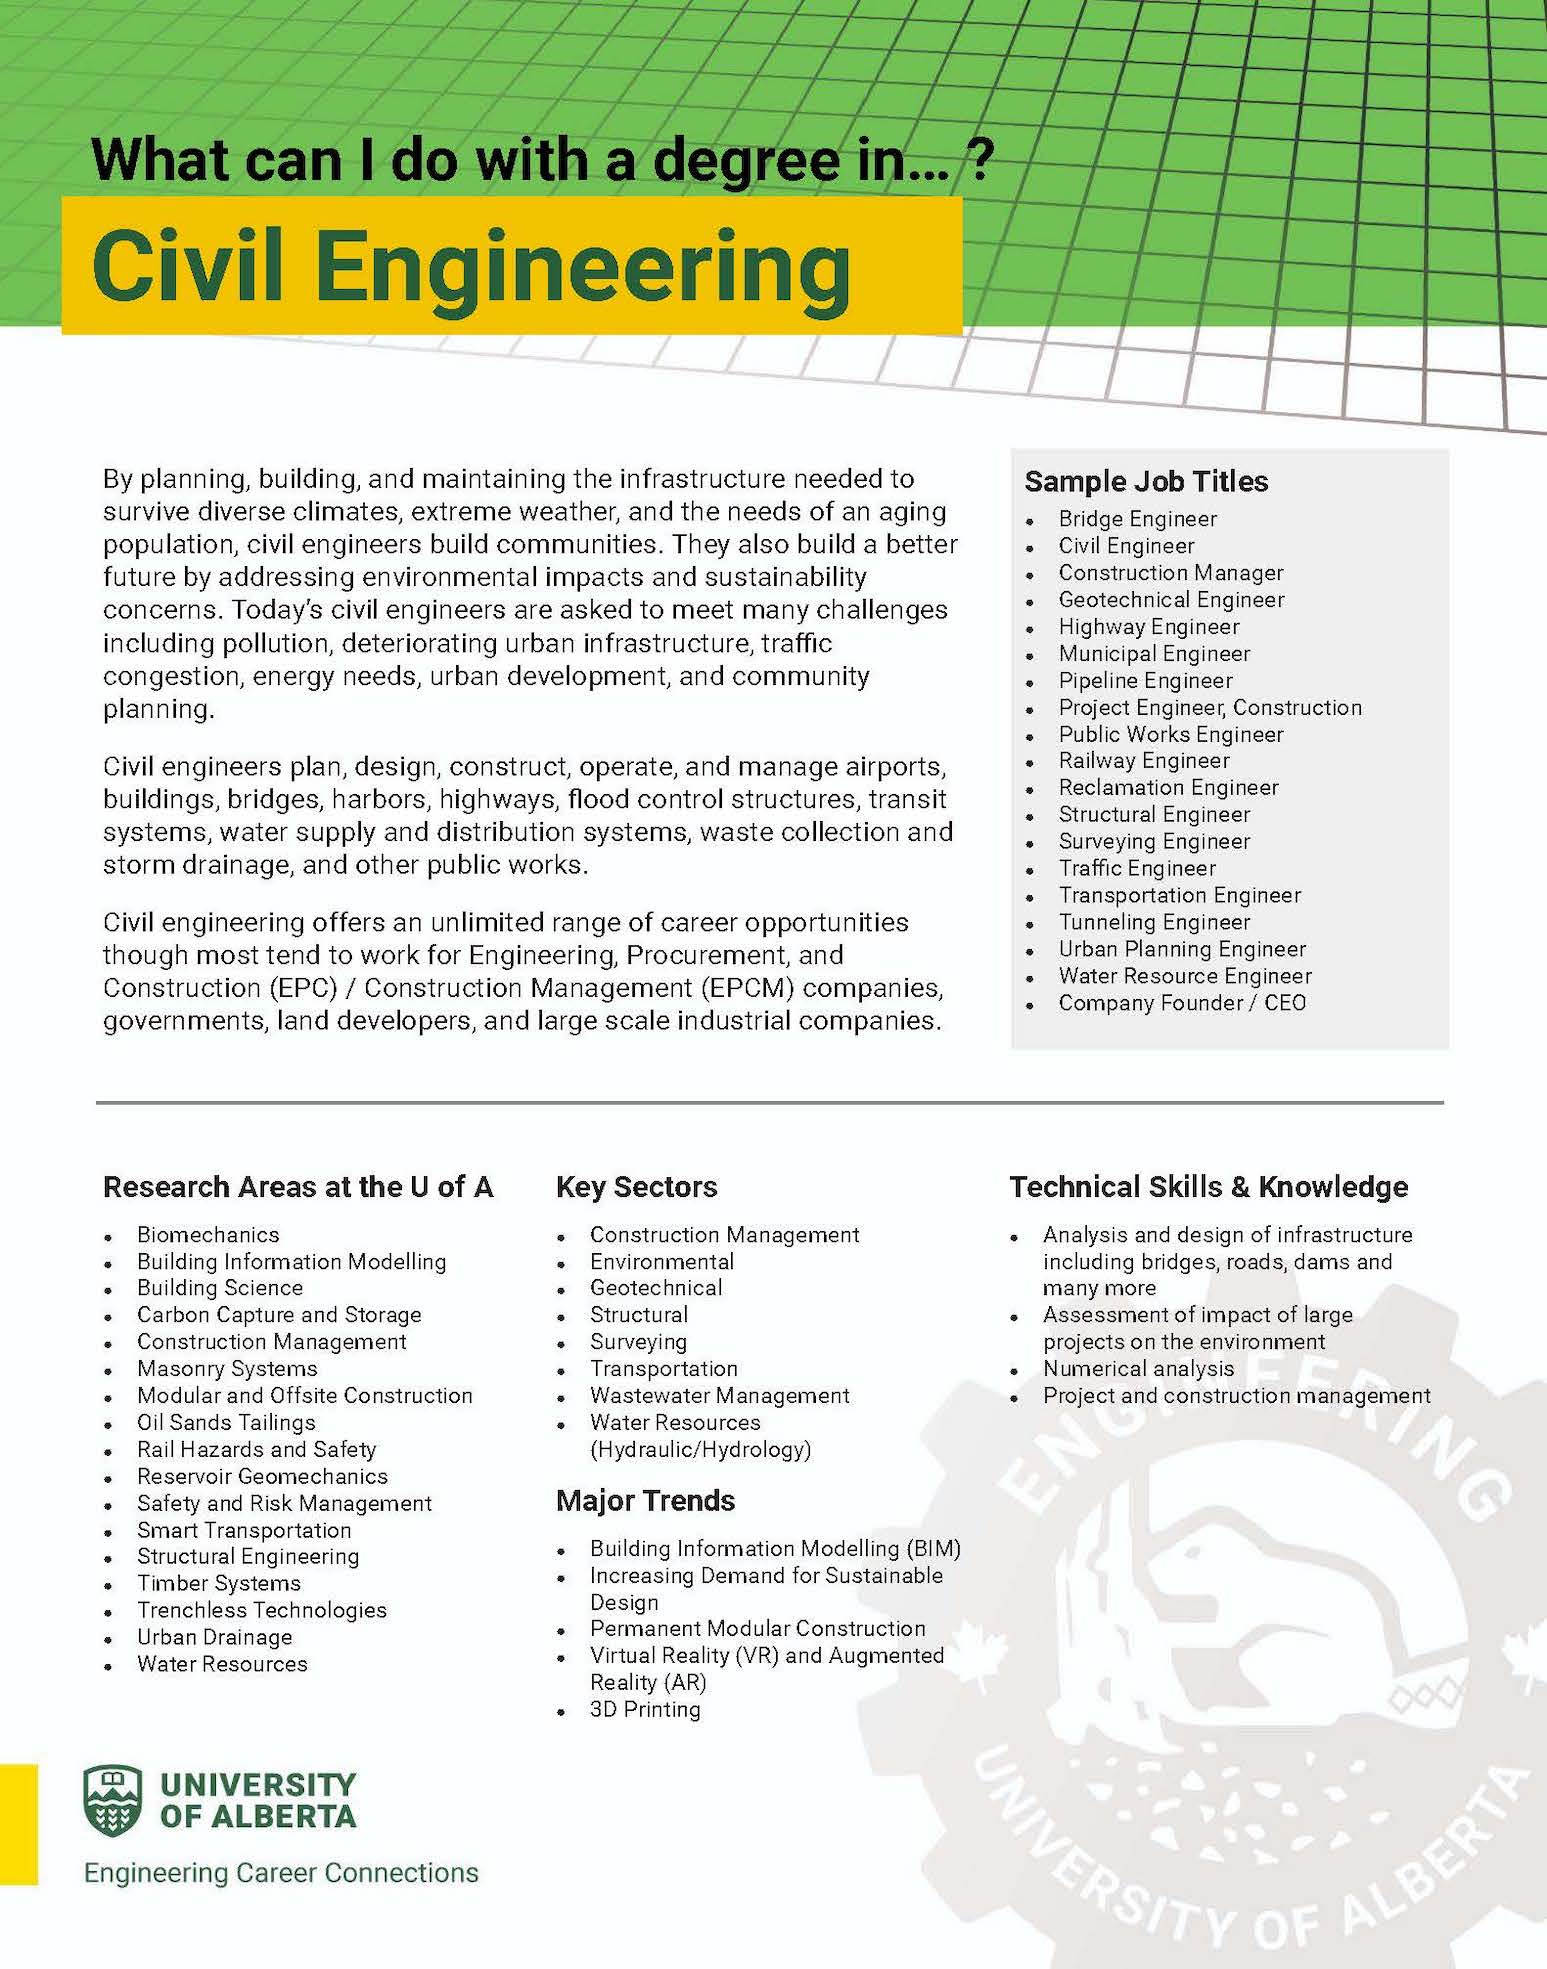 Screenshot of the "What Can I Do With A Degree in Civil Engineering?” Handout. The image links to the handout.